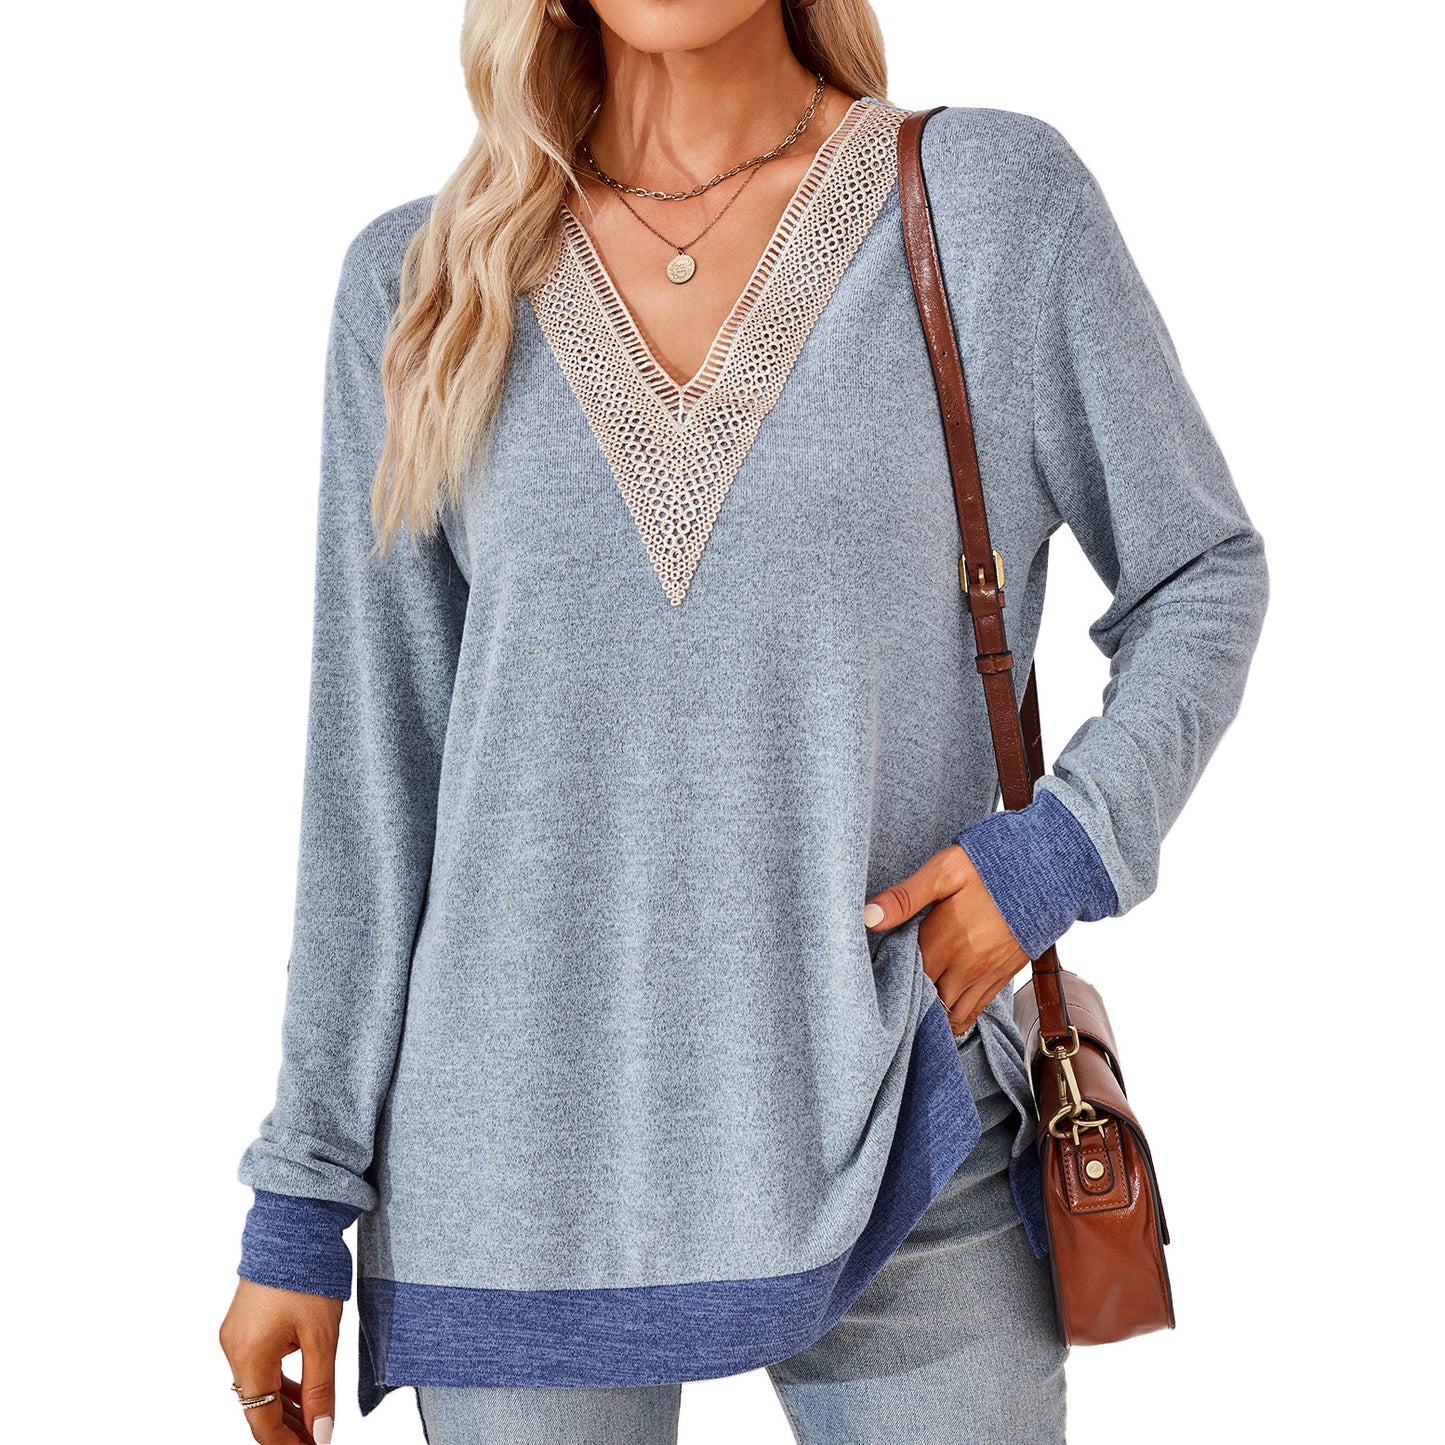 Elevate Your Wardrobe with the Fashion V-neck Lace Solid Color Loose-fitting T-shirt Top